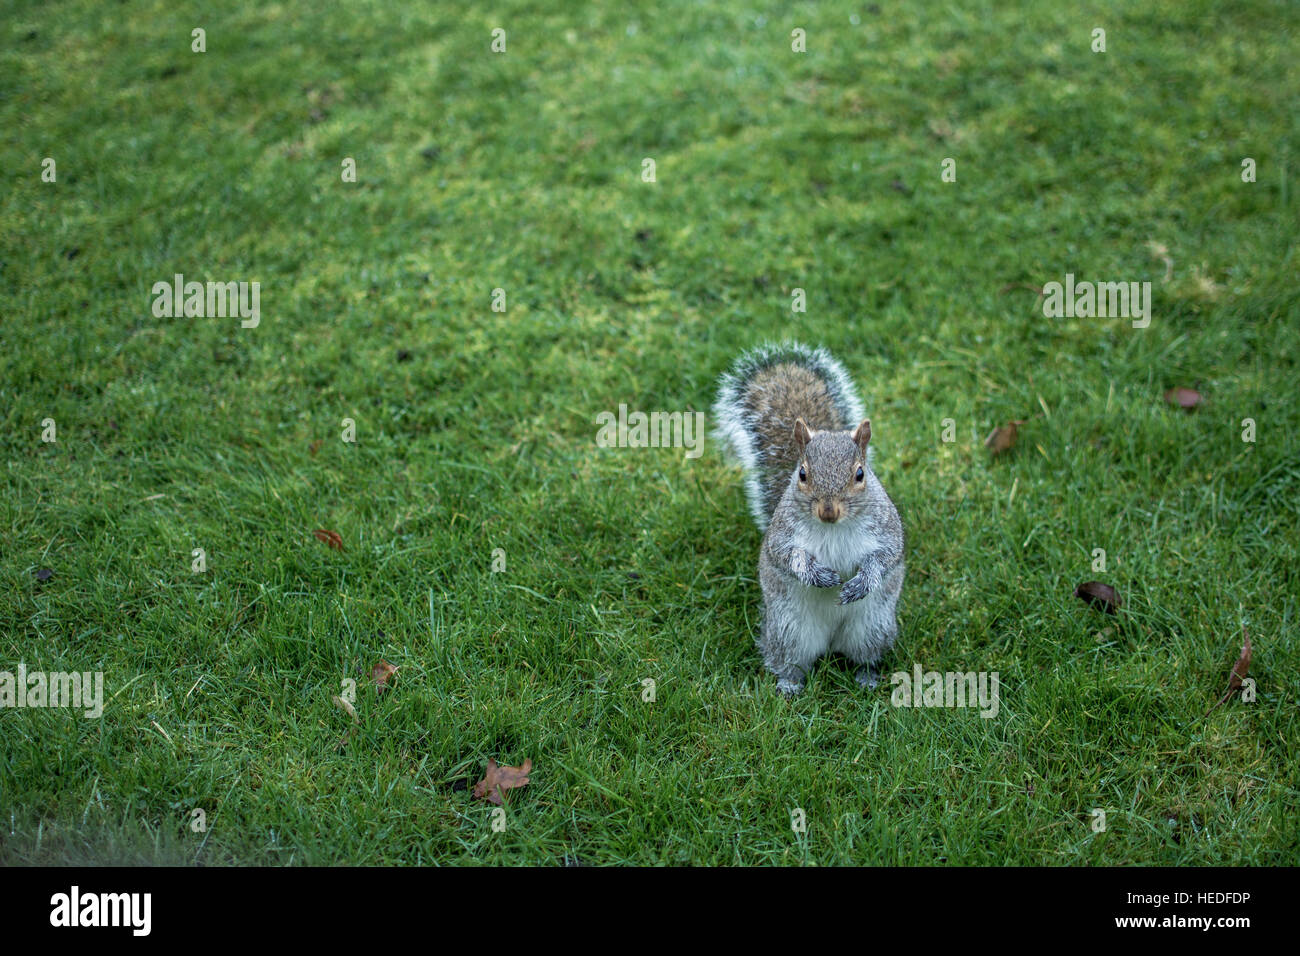 Squirrel standing on grass in a park in London Stock Photo